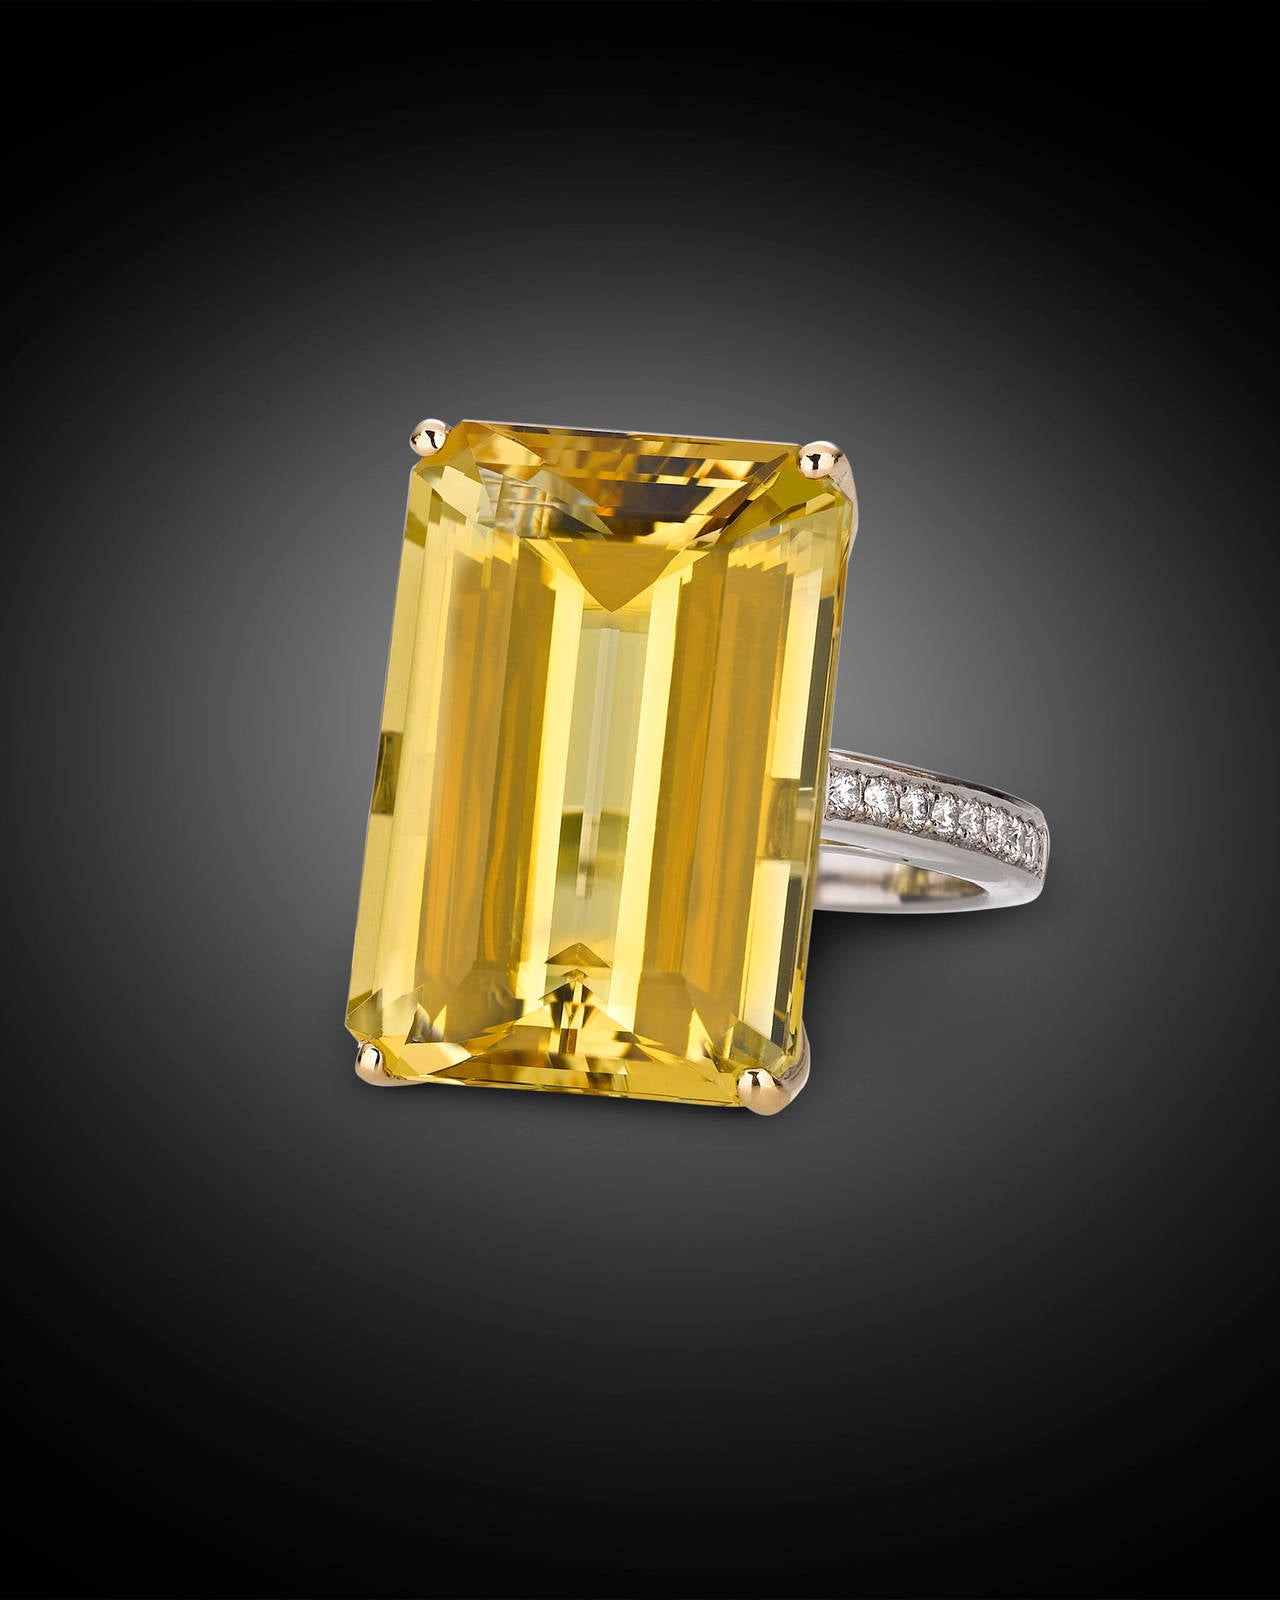 A brilliant octagon-cut golden beryl radiates at the center of this stunning ring. Totaling 28.15 carats, this beryl displays a rich golden hue that rivals the warmth of the afternoon sun. Colorless diamonds totaling approximately 0.34 carats